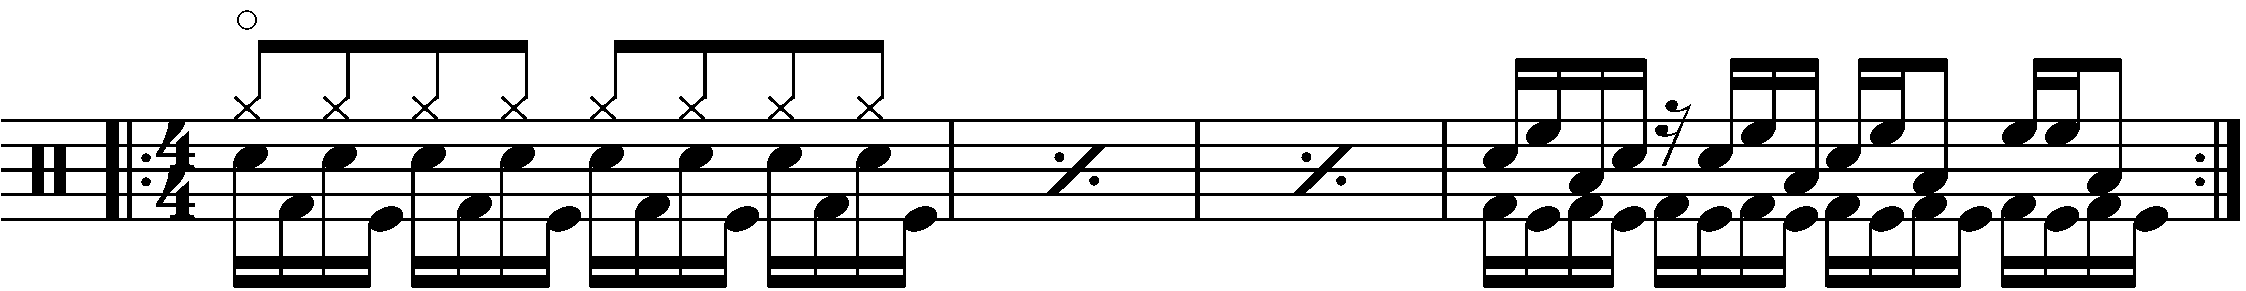 A four bar phrase built around reverse sub divided eighth note blast beats